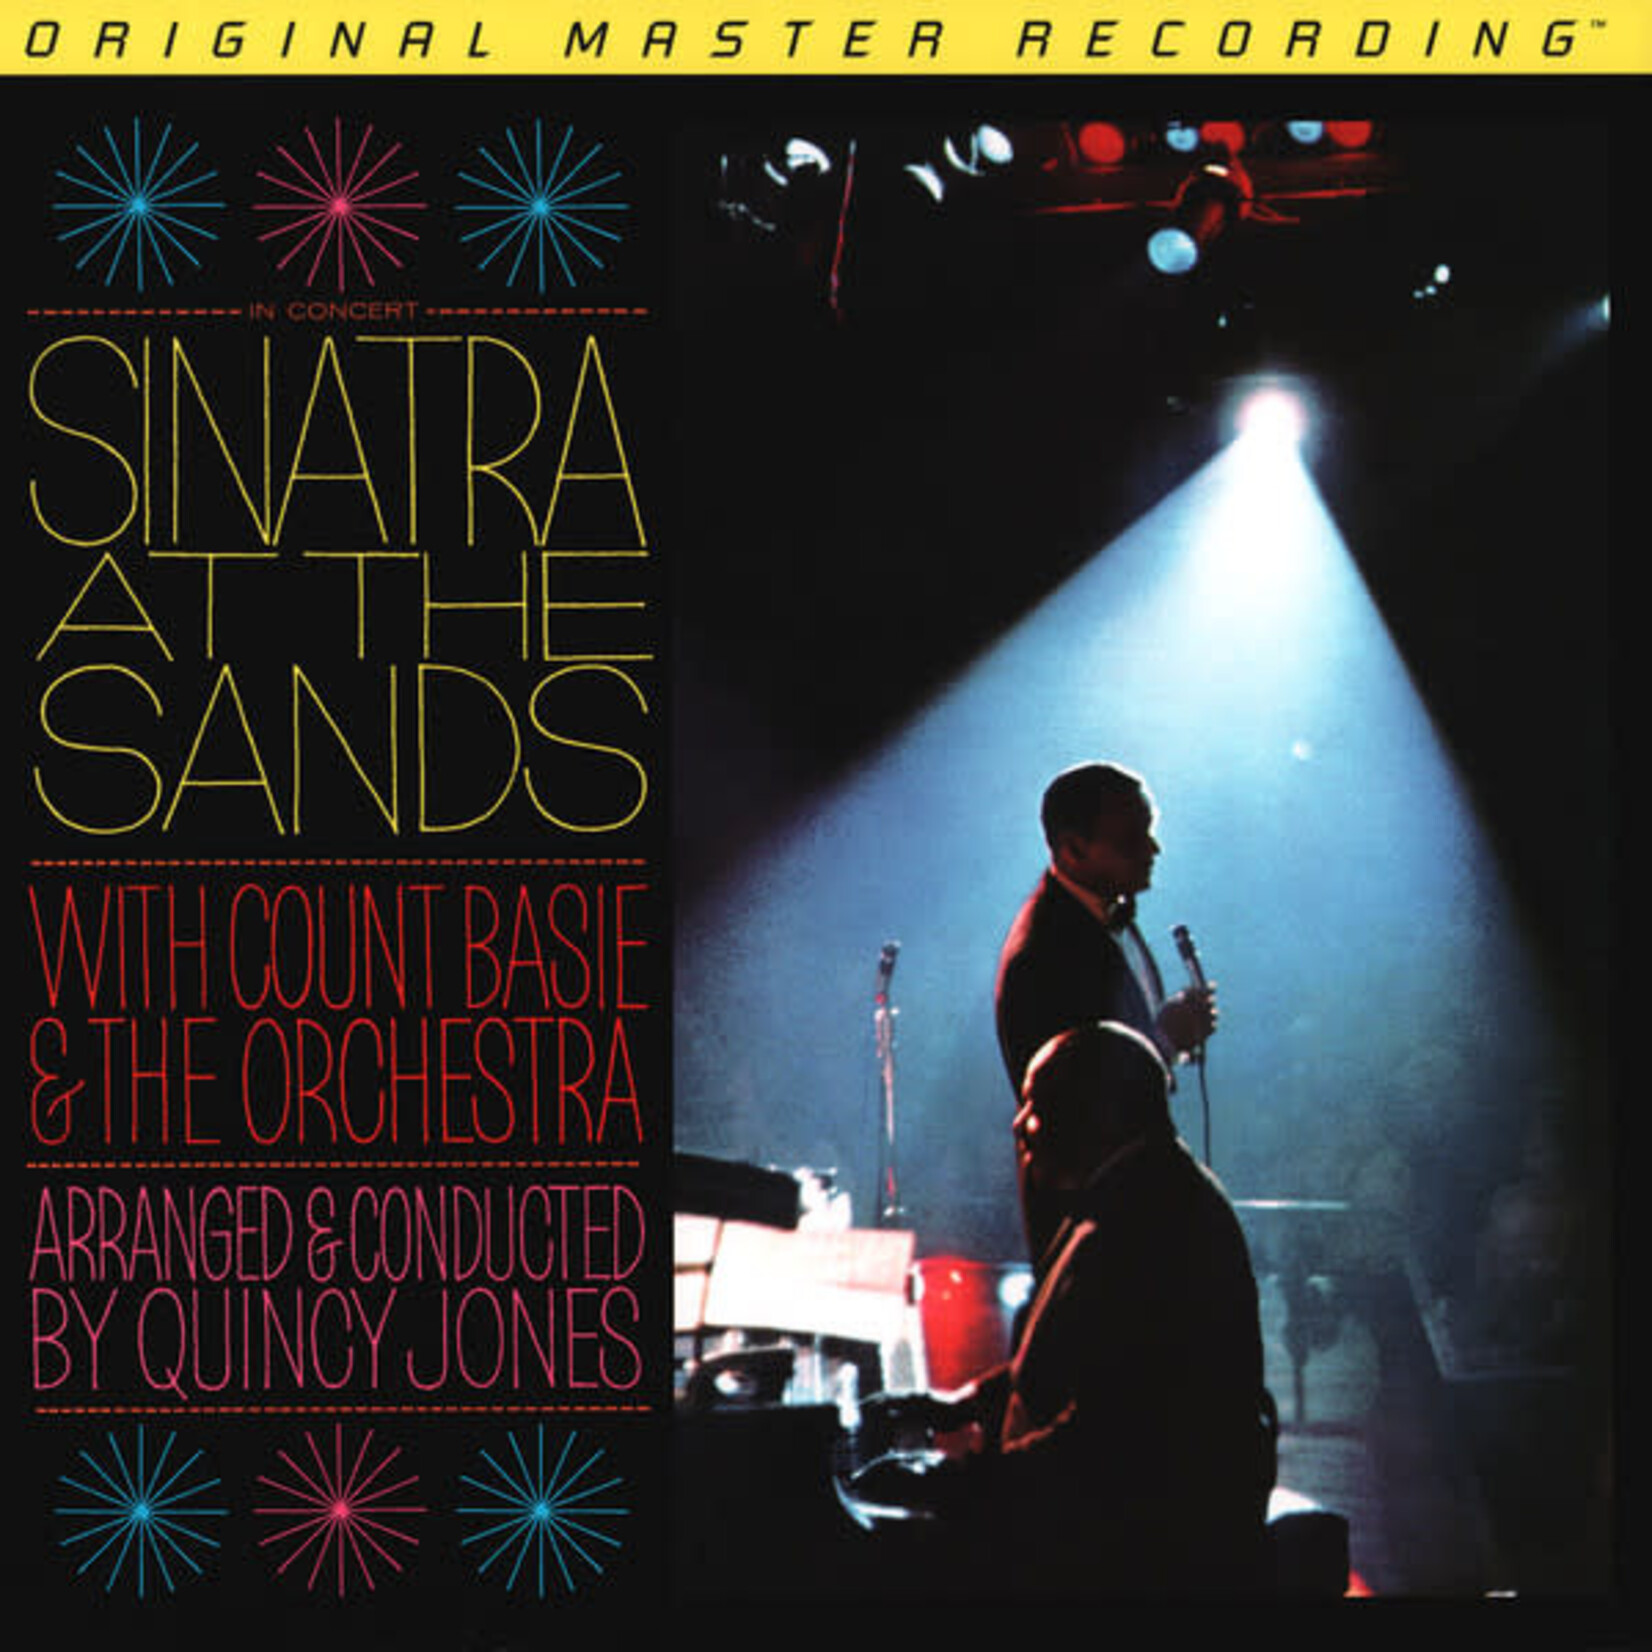 Sinatra, Frank: Live at the Sands (2010 Mobile Fidelity, Audiophile) [KOLLECTIBLES]